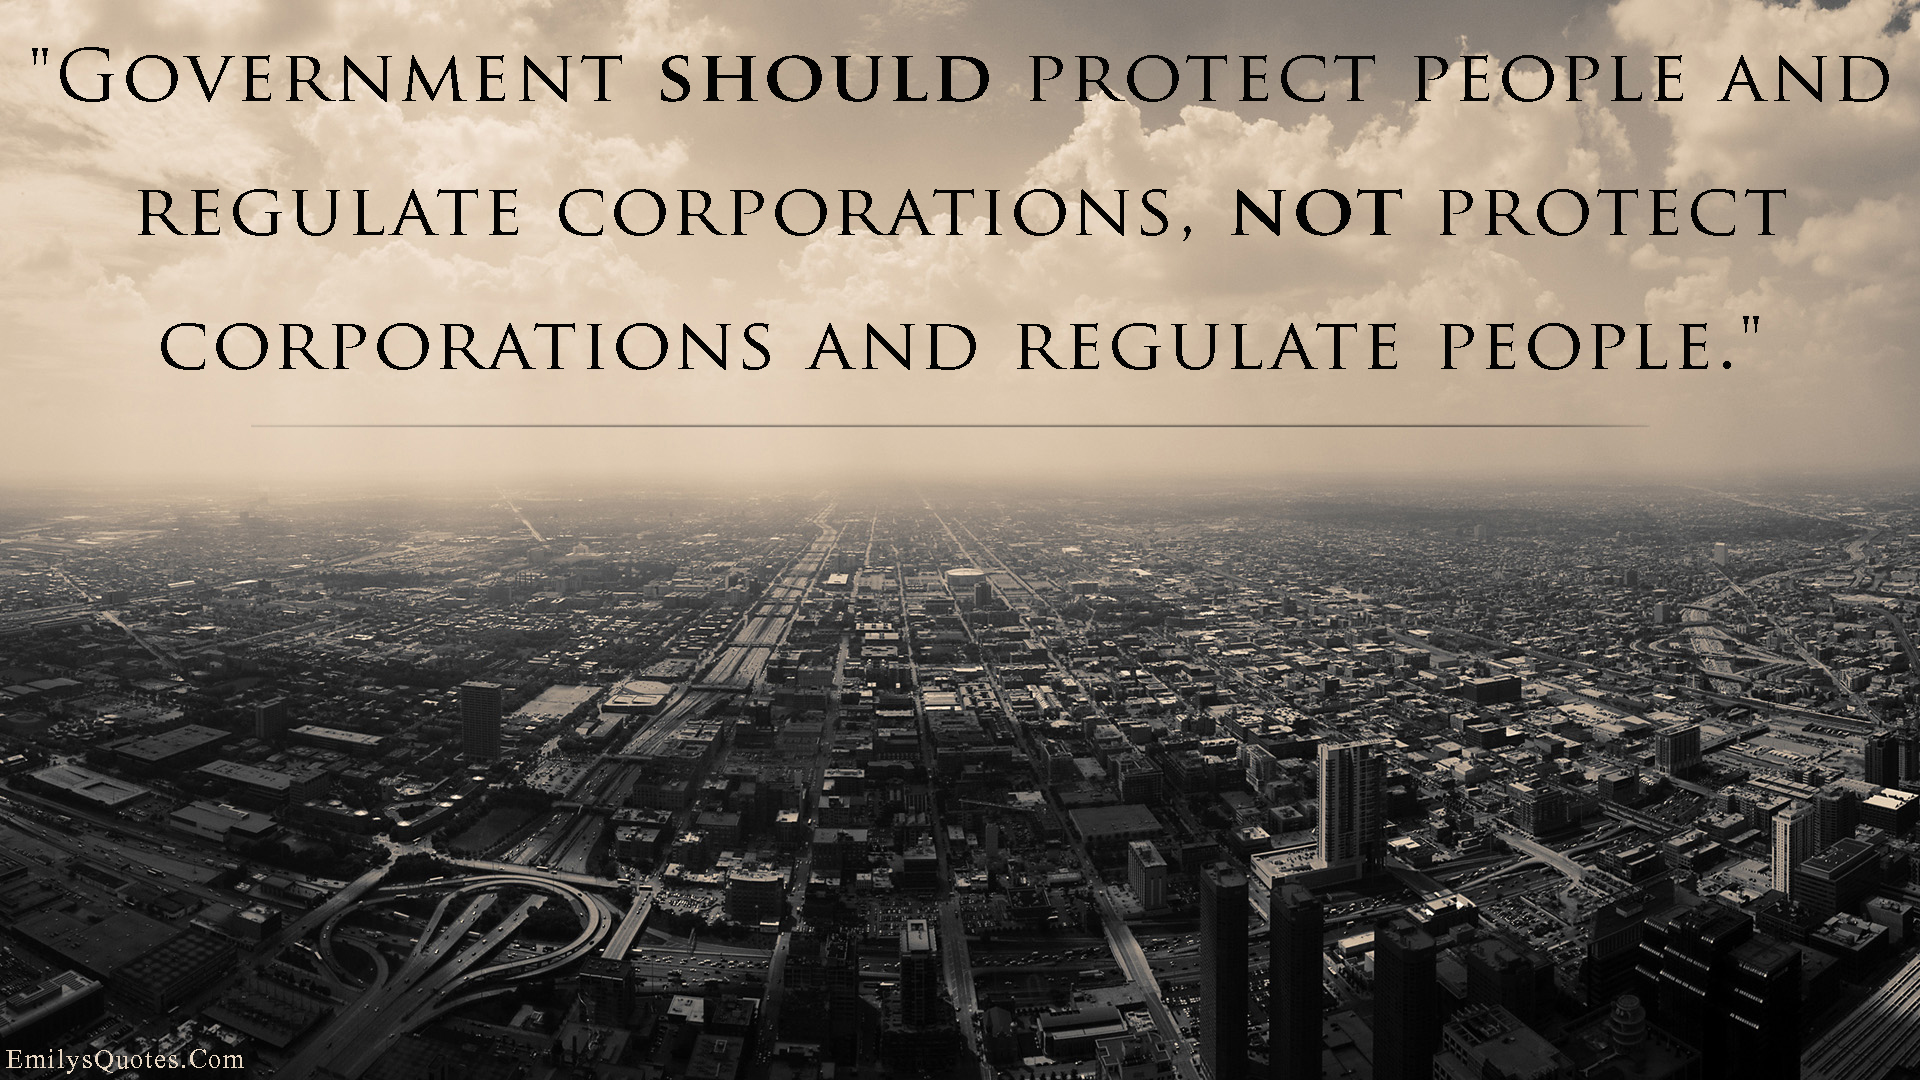 Government should protect people and regulate corporations, not protect corporations and regulate people